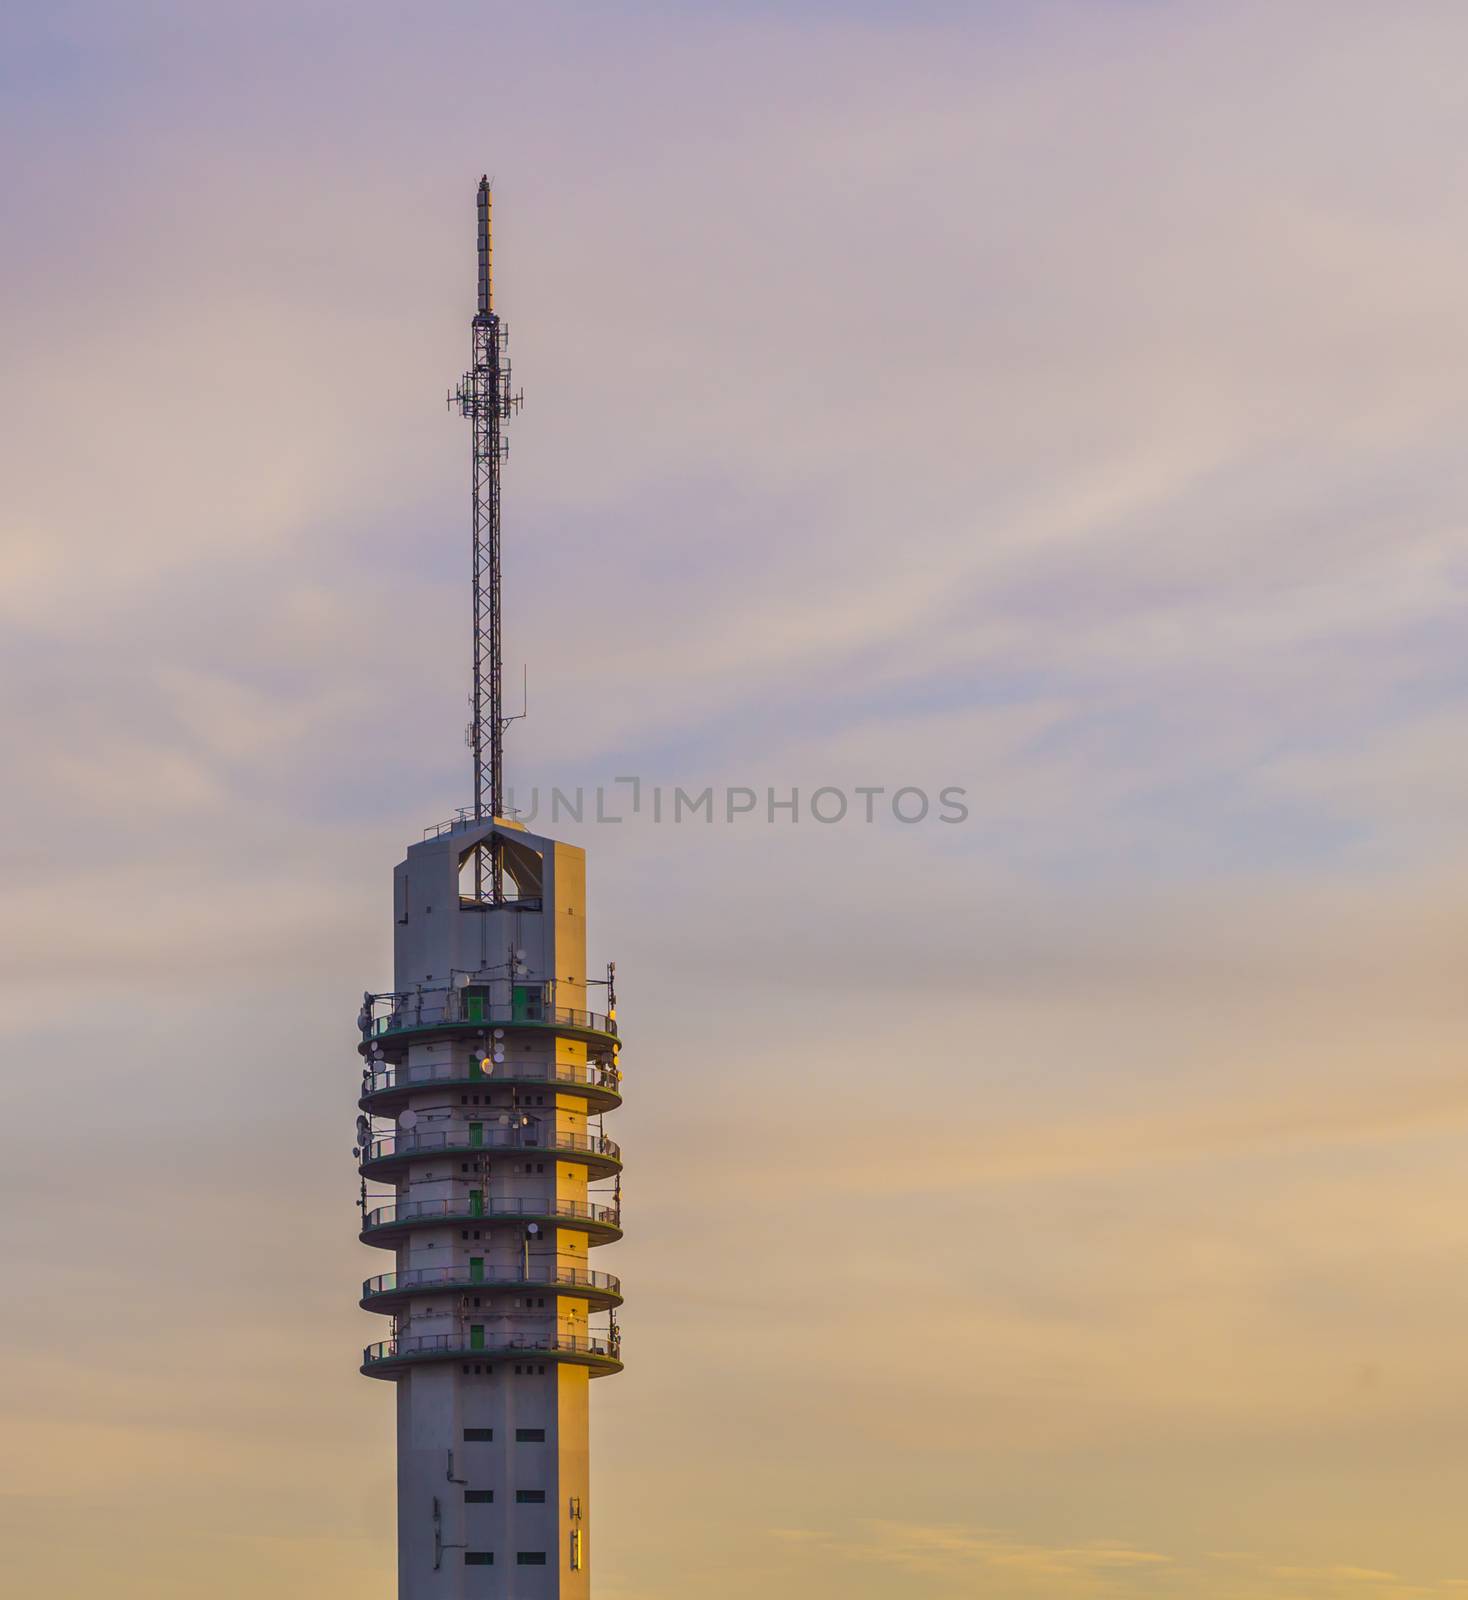 signal transmitting tower with a colorful sky full of clouds, telecommunication technology and architecture